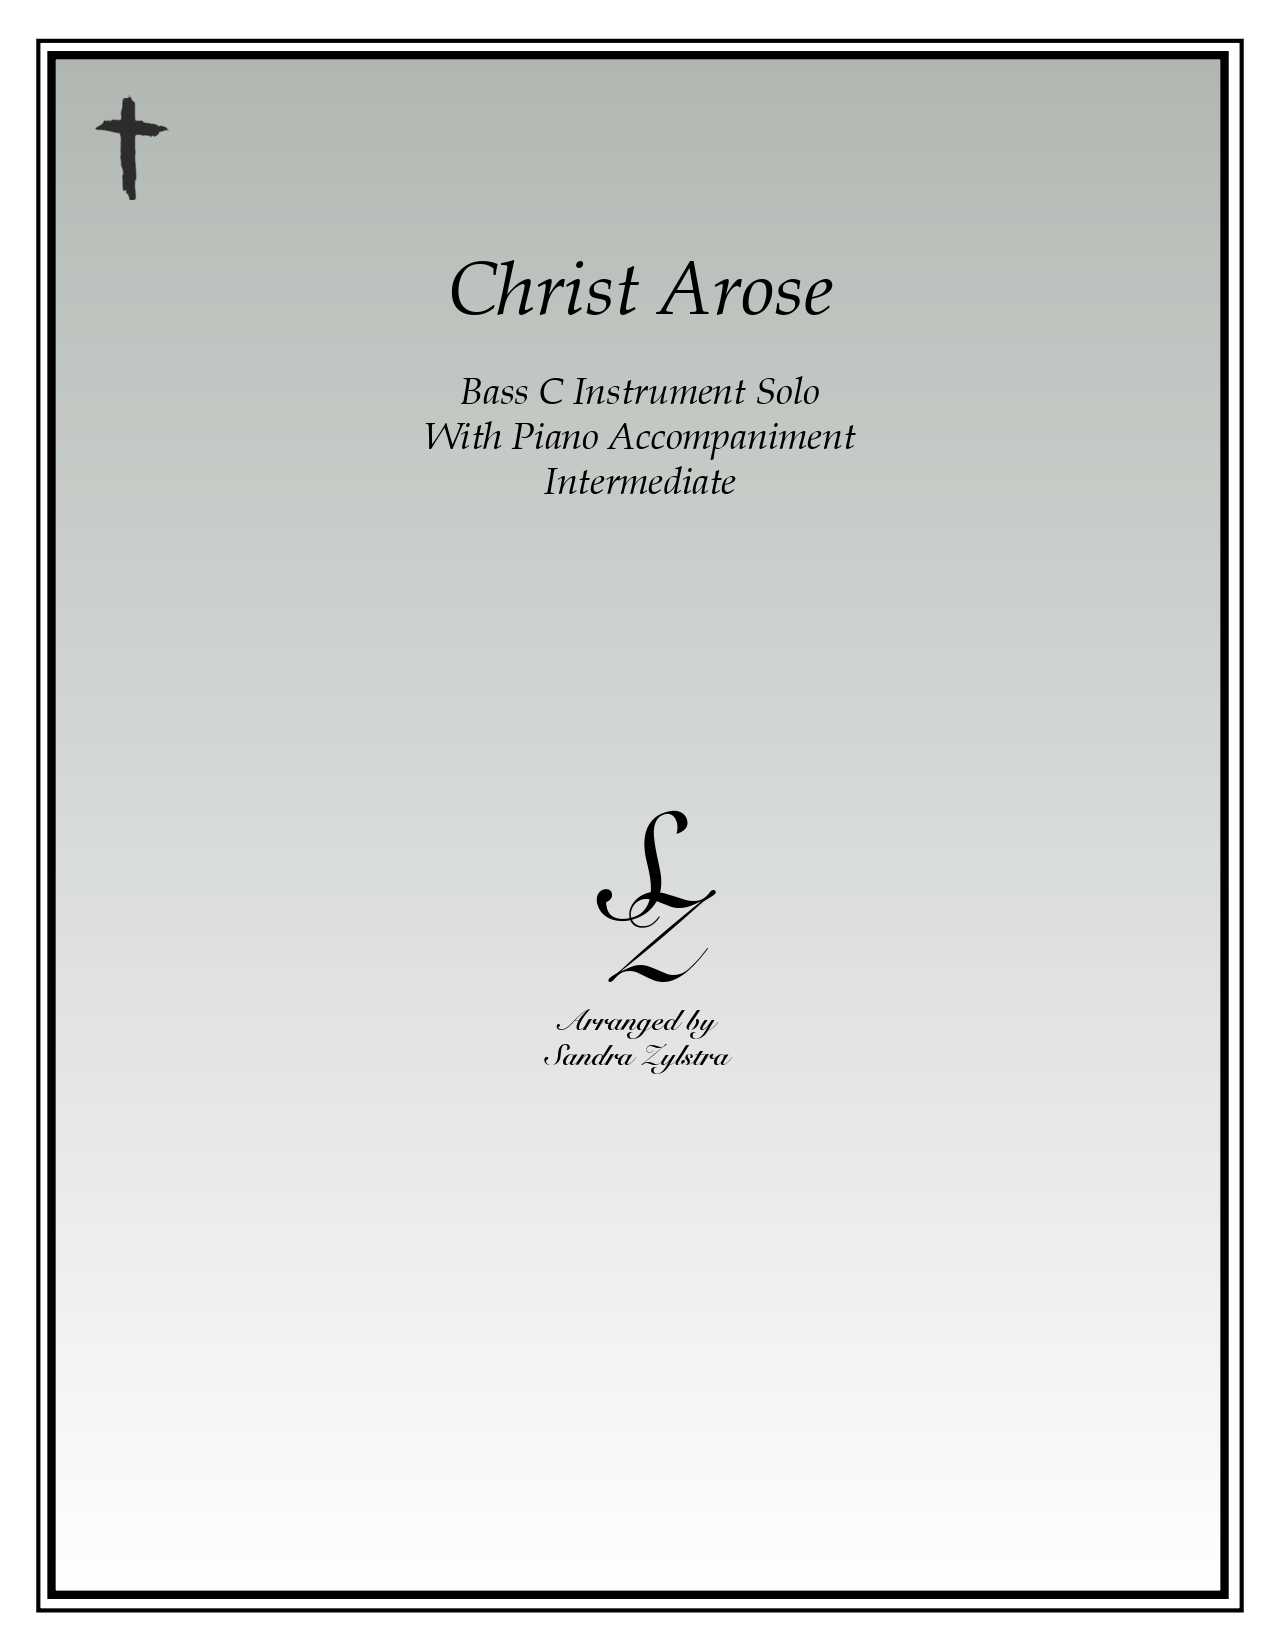 Christ Arose bass C instrument solo part cover page 00011